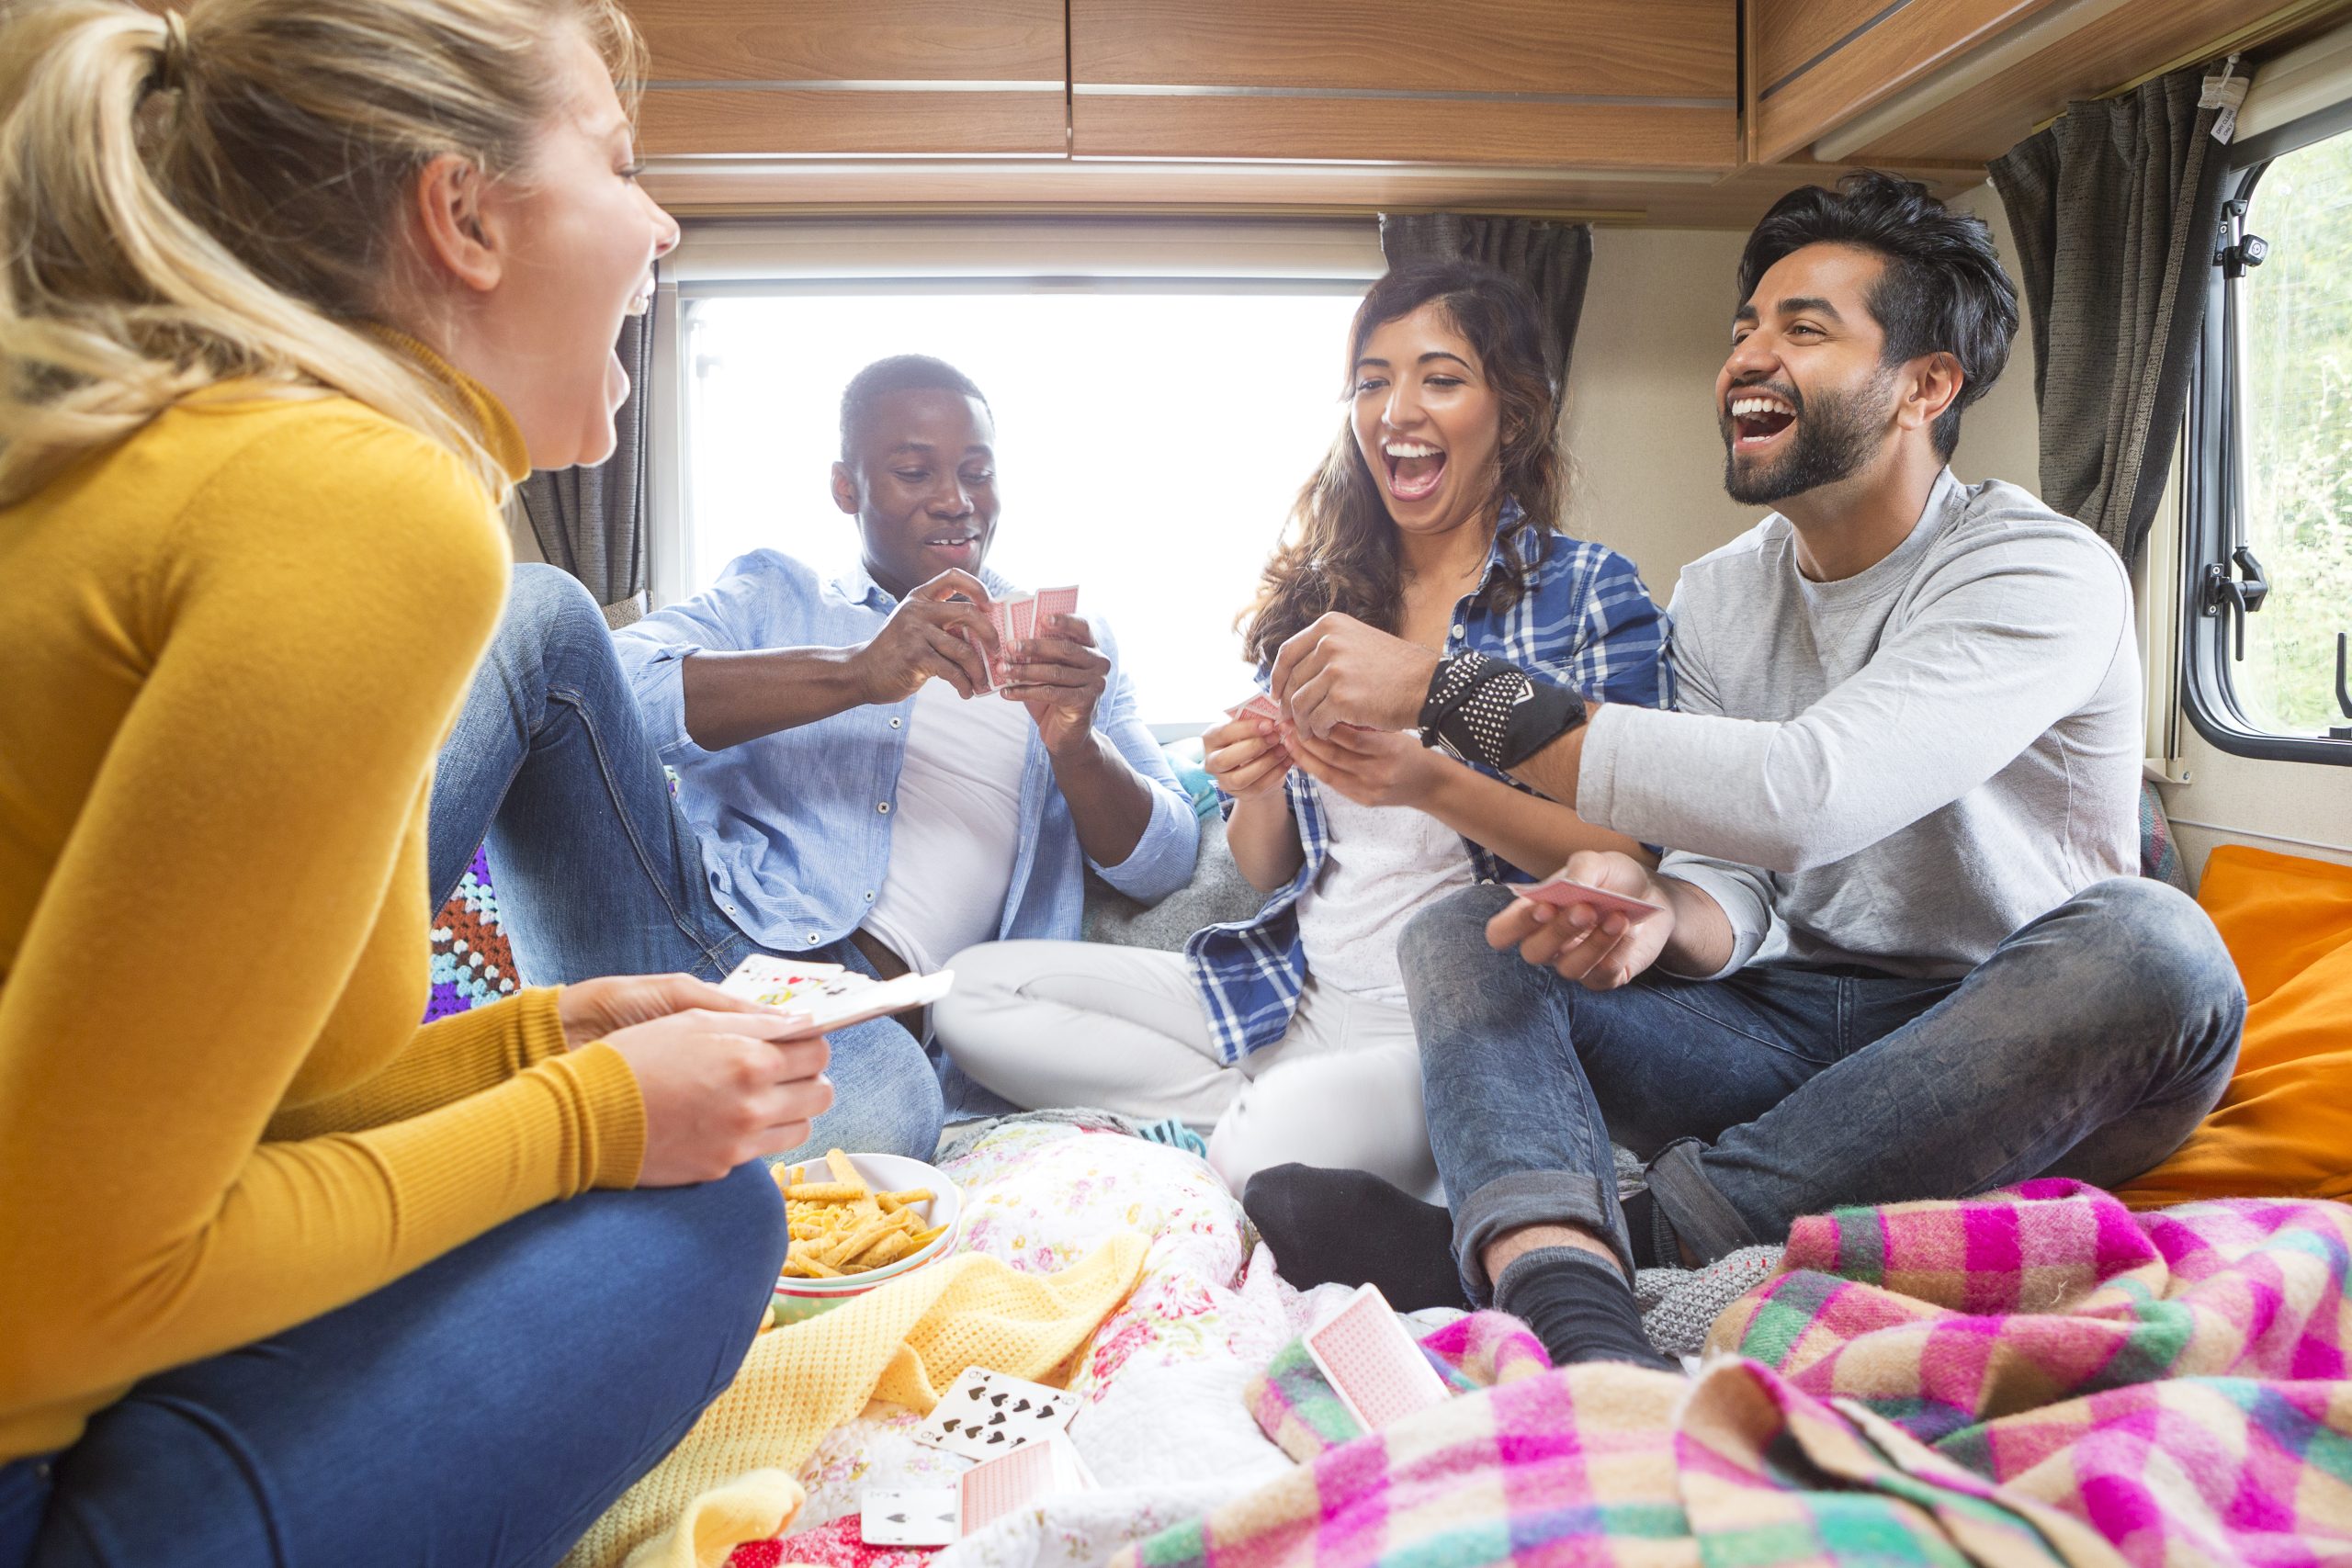 Group of friends having fun playing cards in a motorhome or rv how to have fun on a motorhome trip